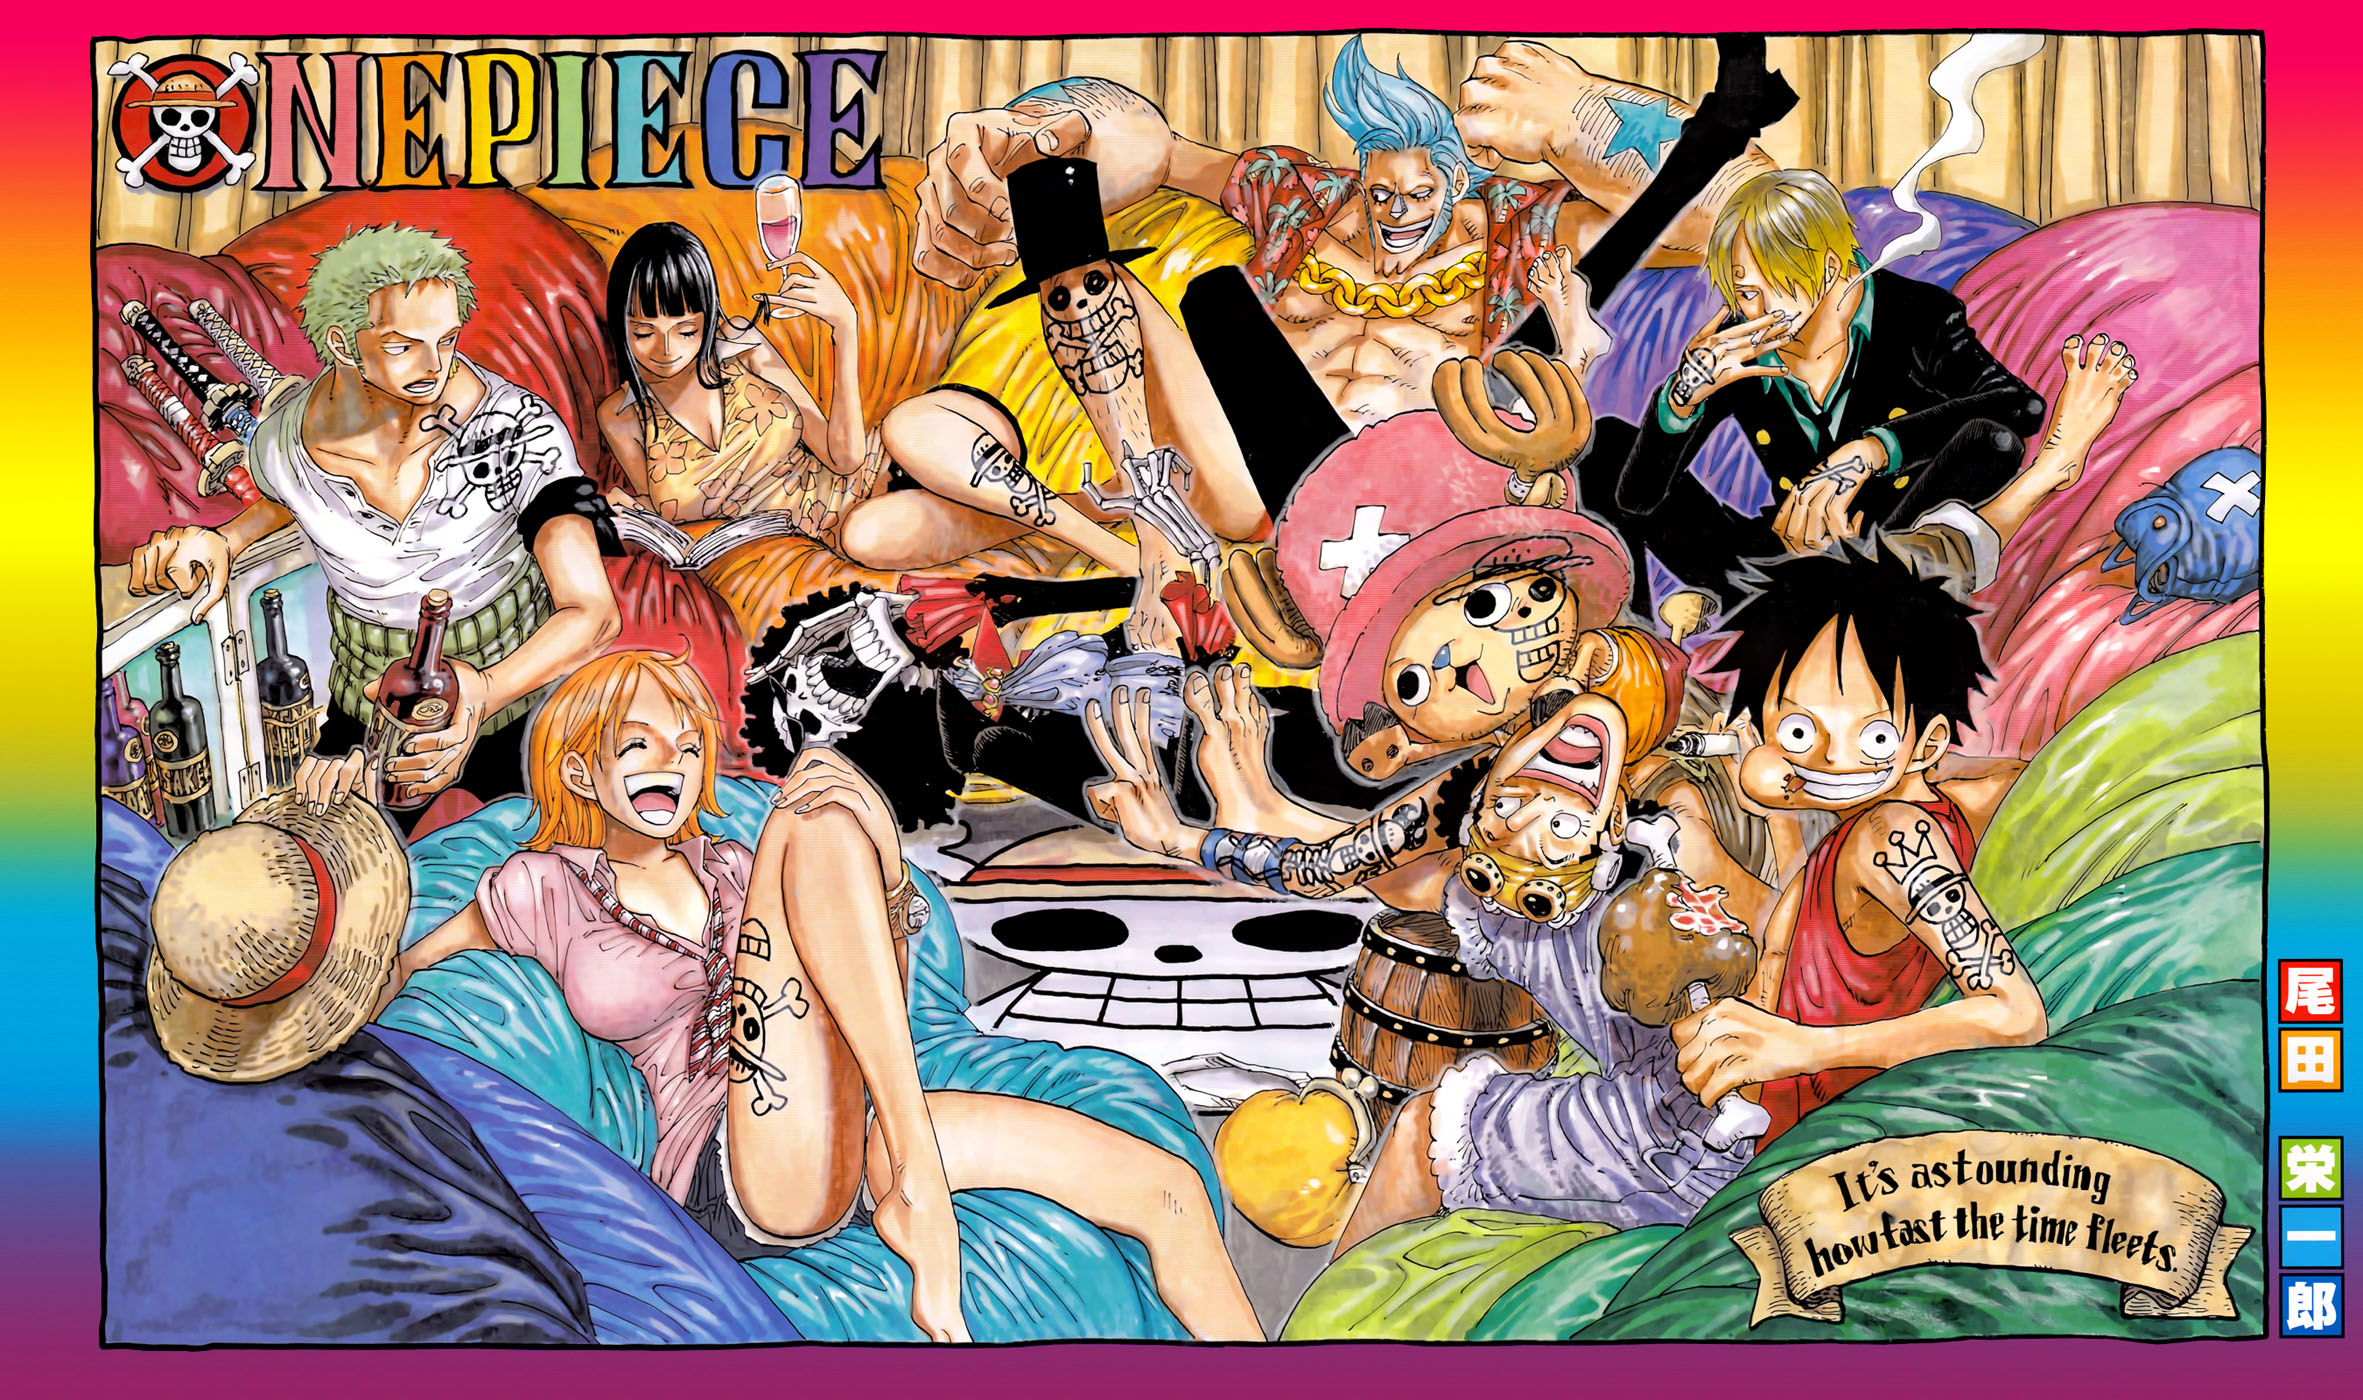 Chapter 37, One Piece Wiki